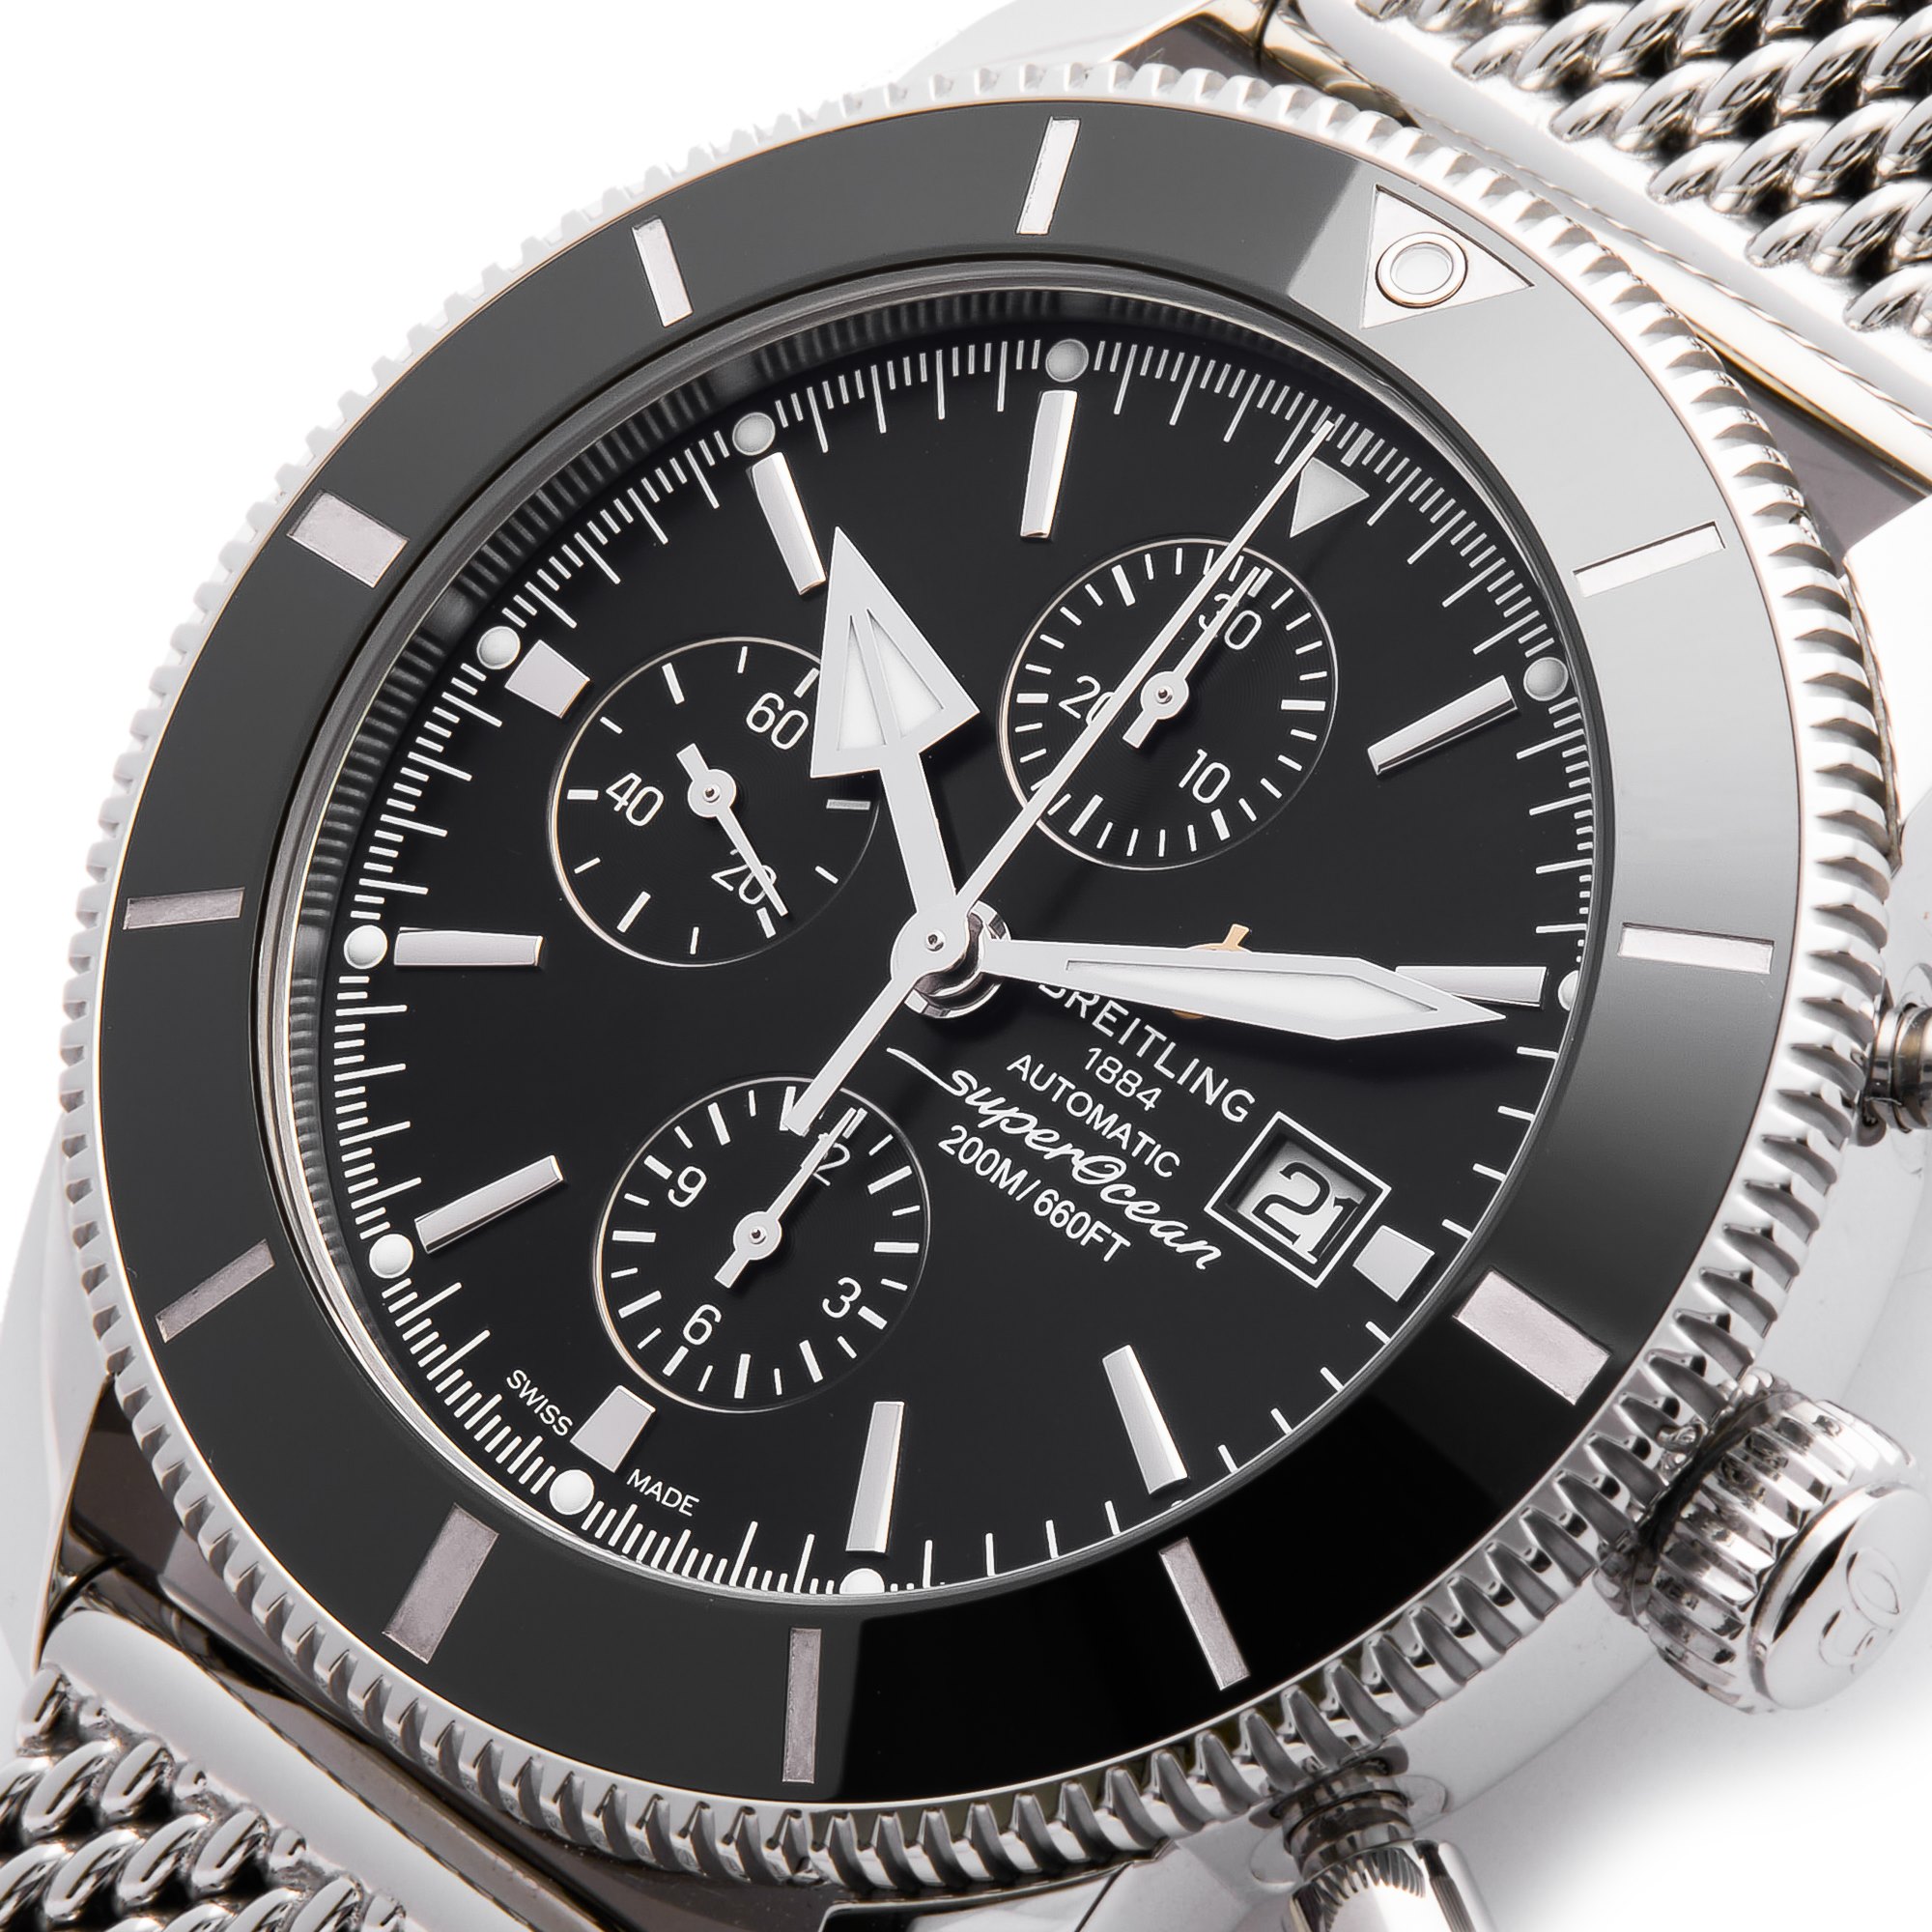 Breitling Superocean Heritage Chronograph Stainless Steel A13312